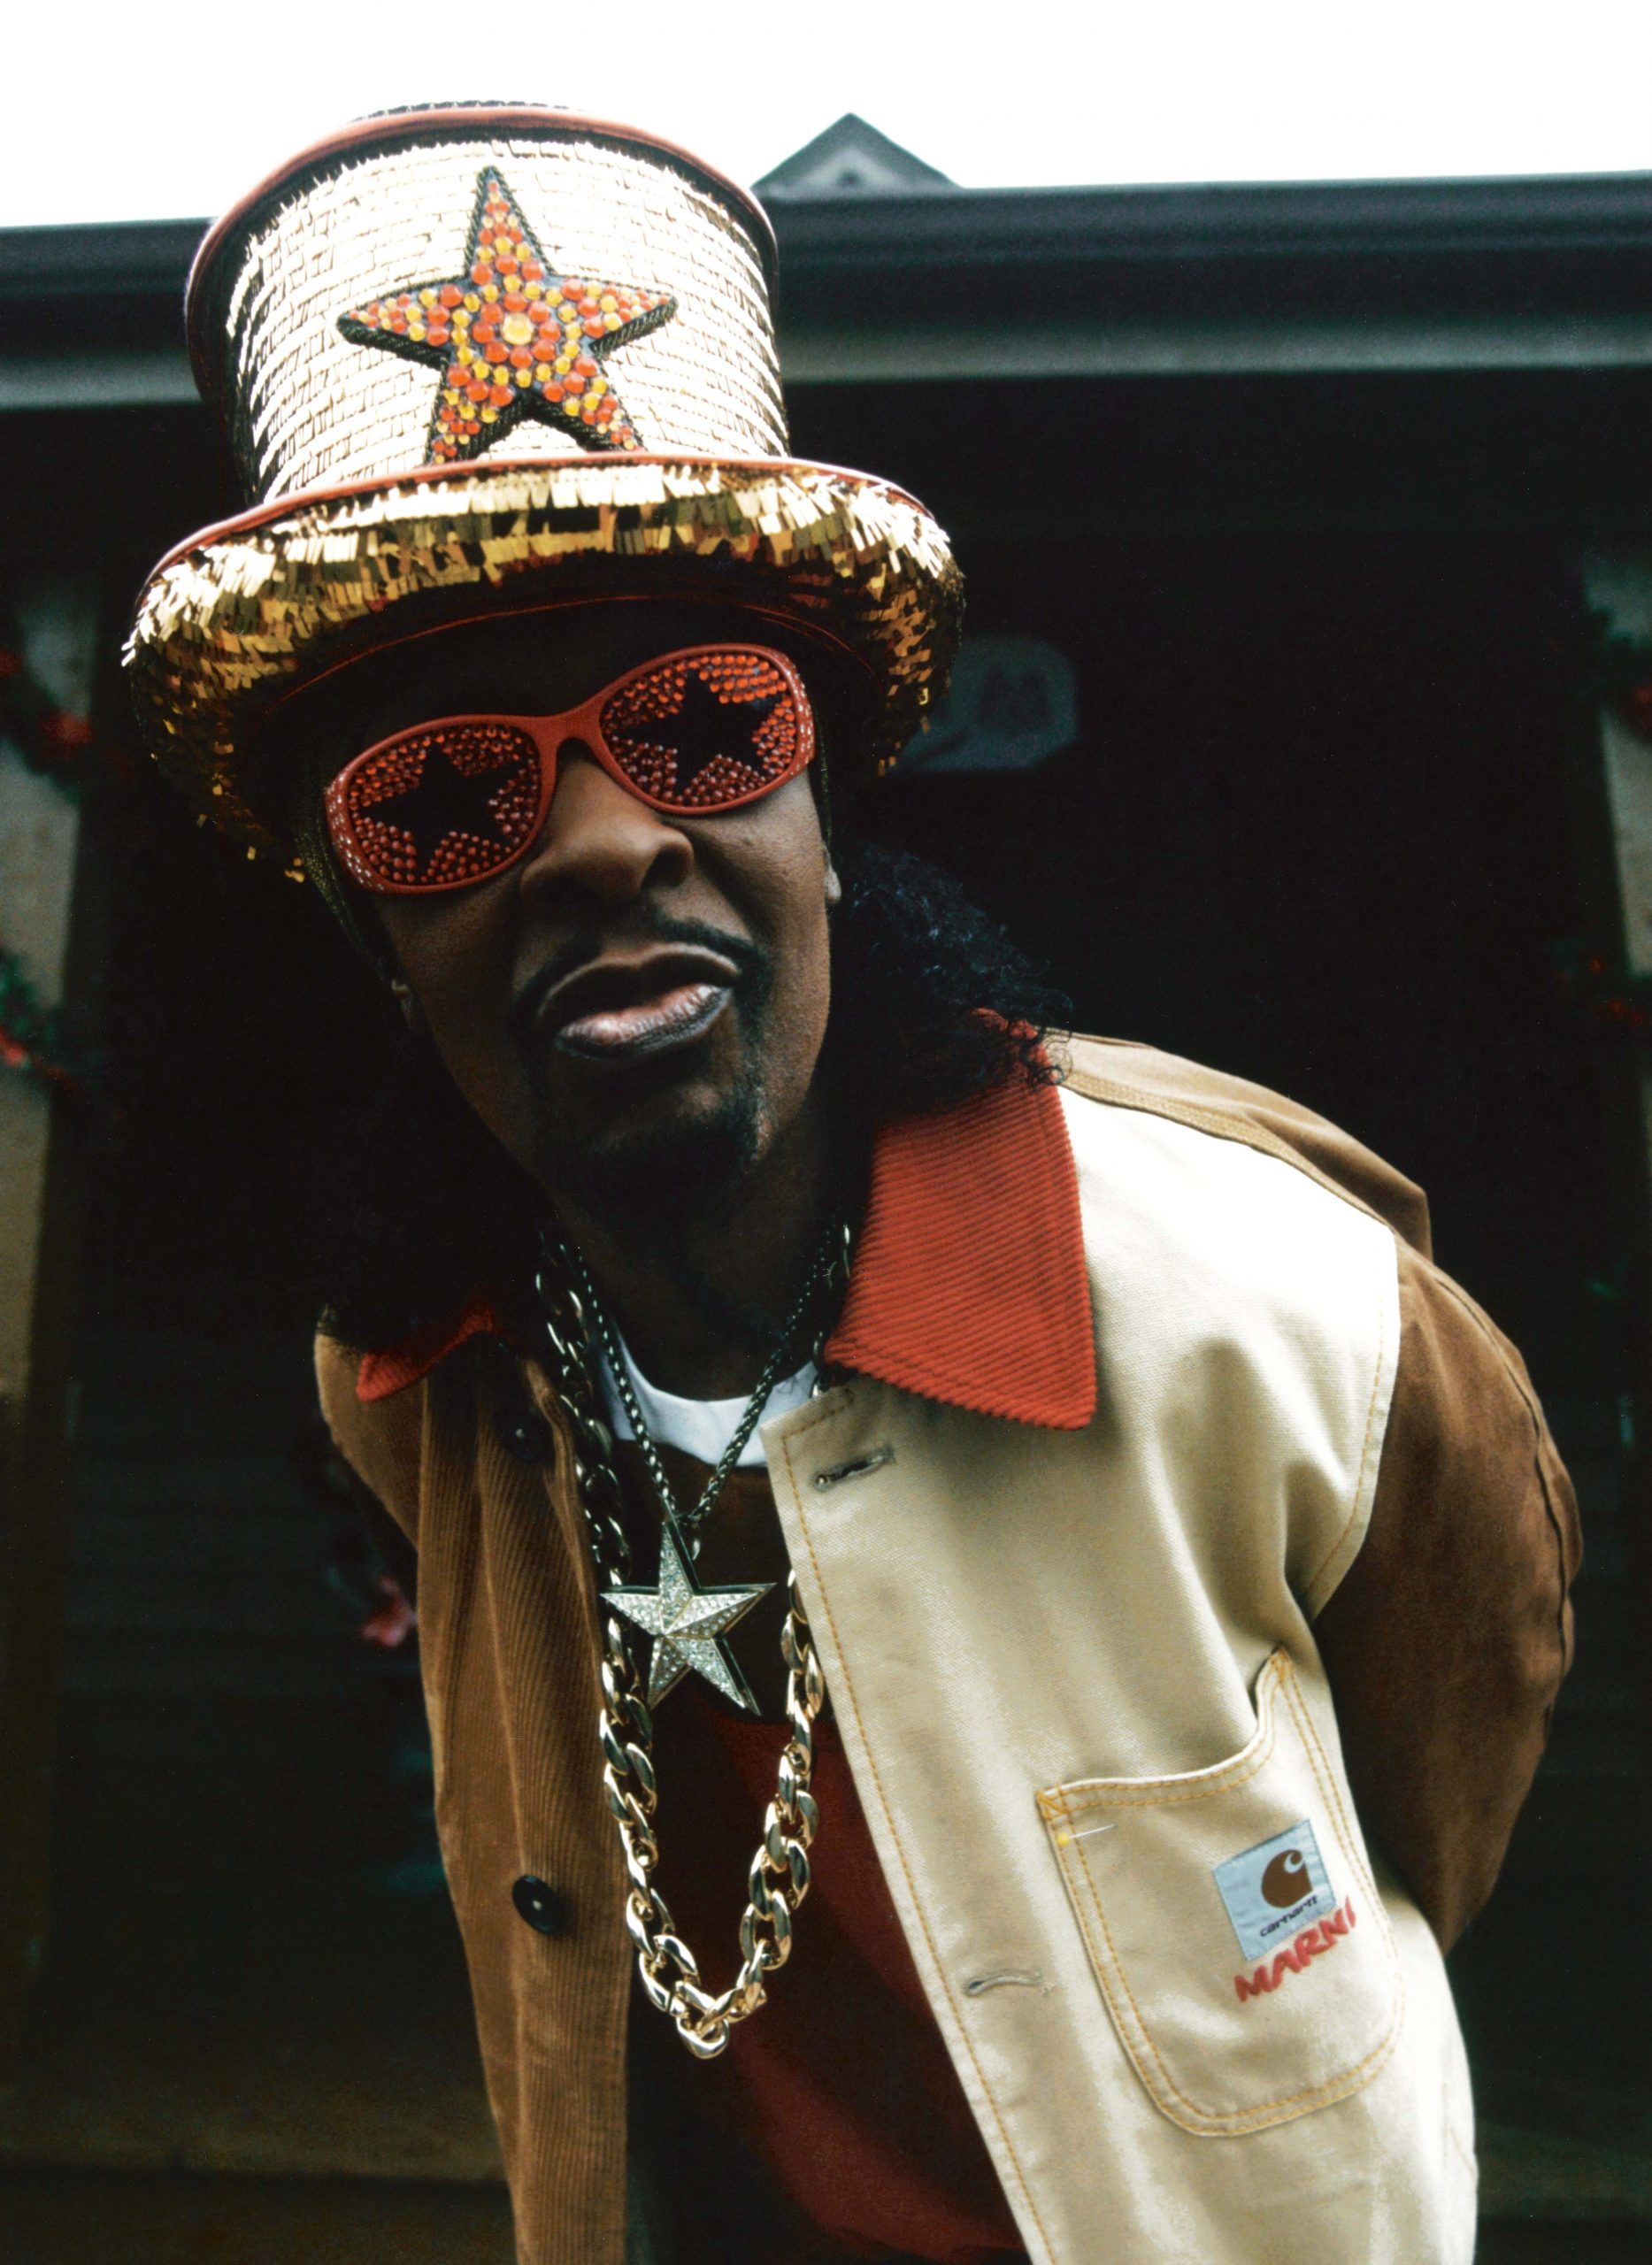 Funk artist Bootsy Collins, wearing the new Marni X Carhartt WIP collaboration